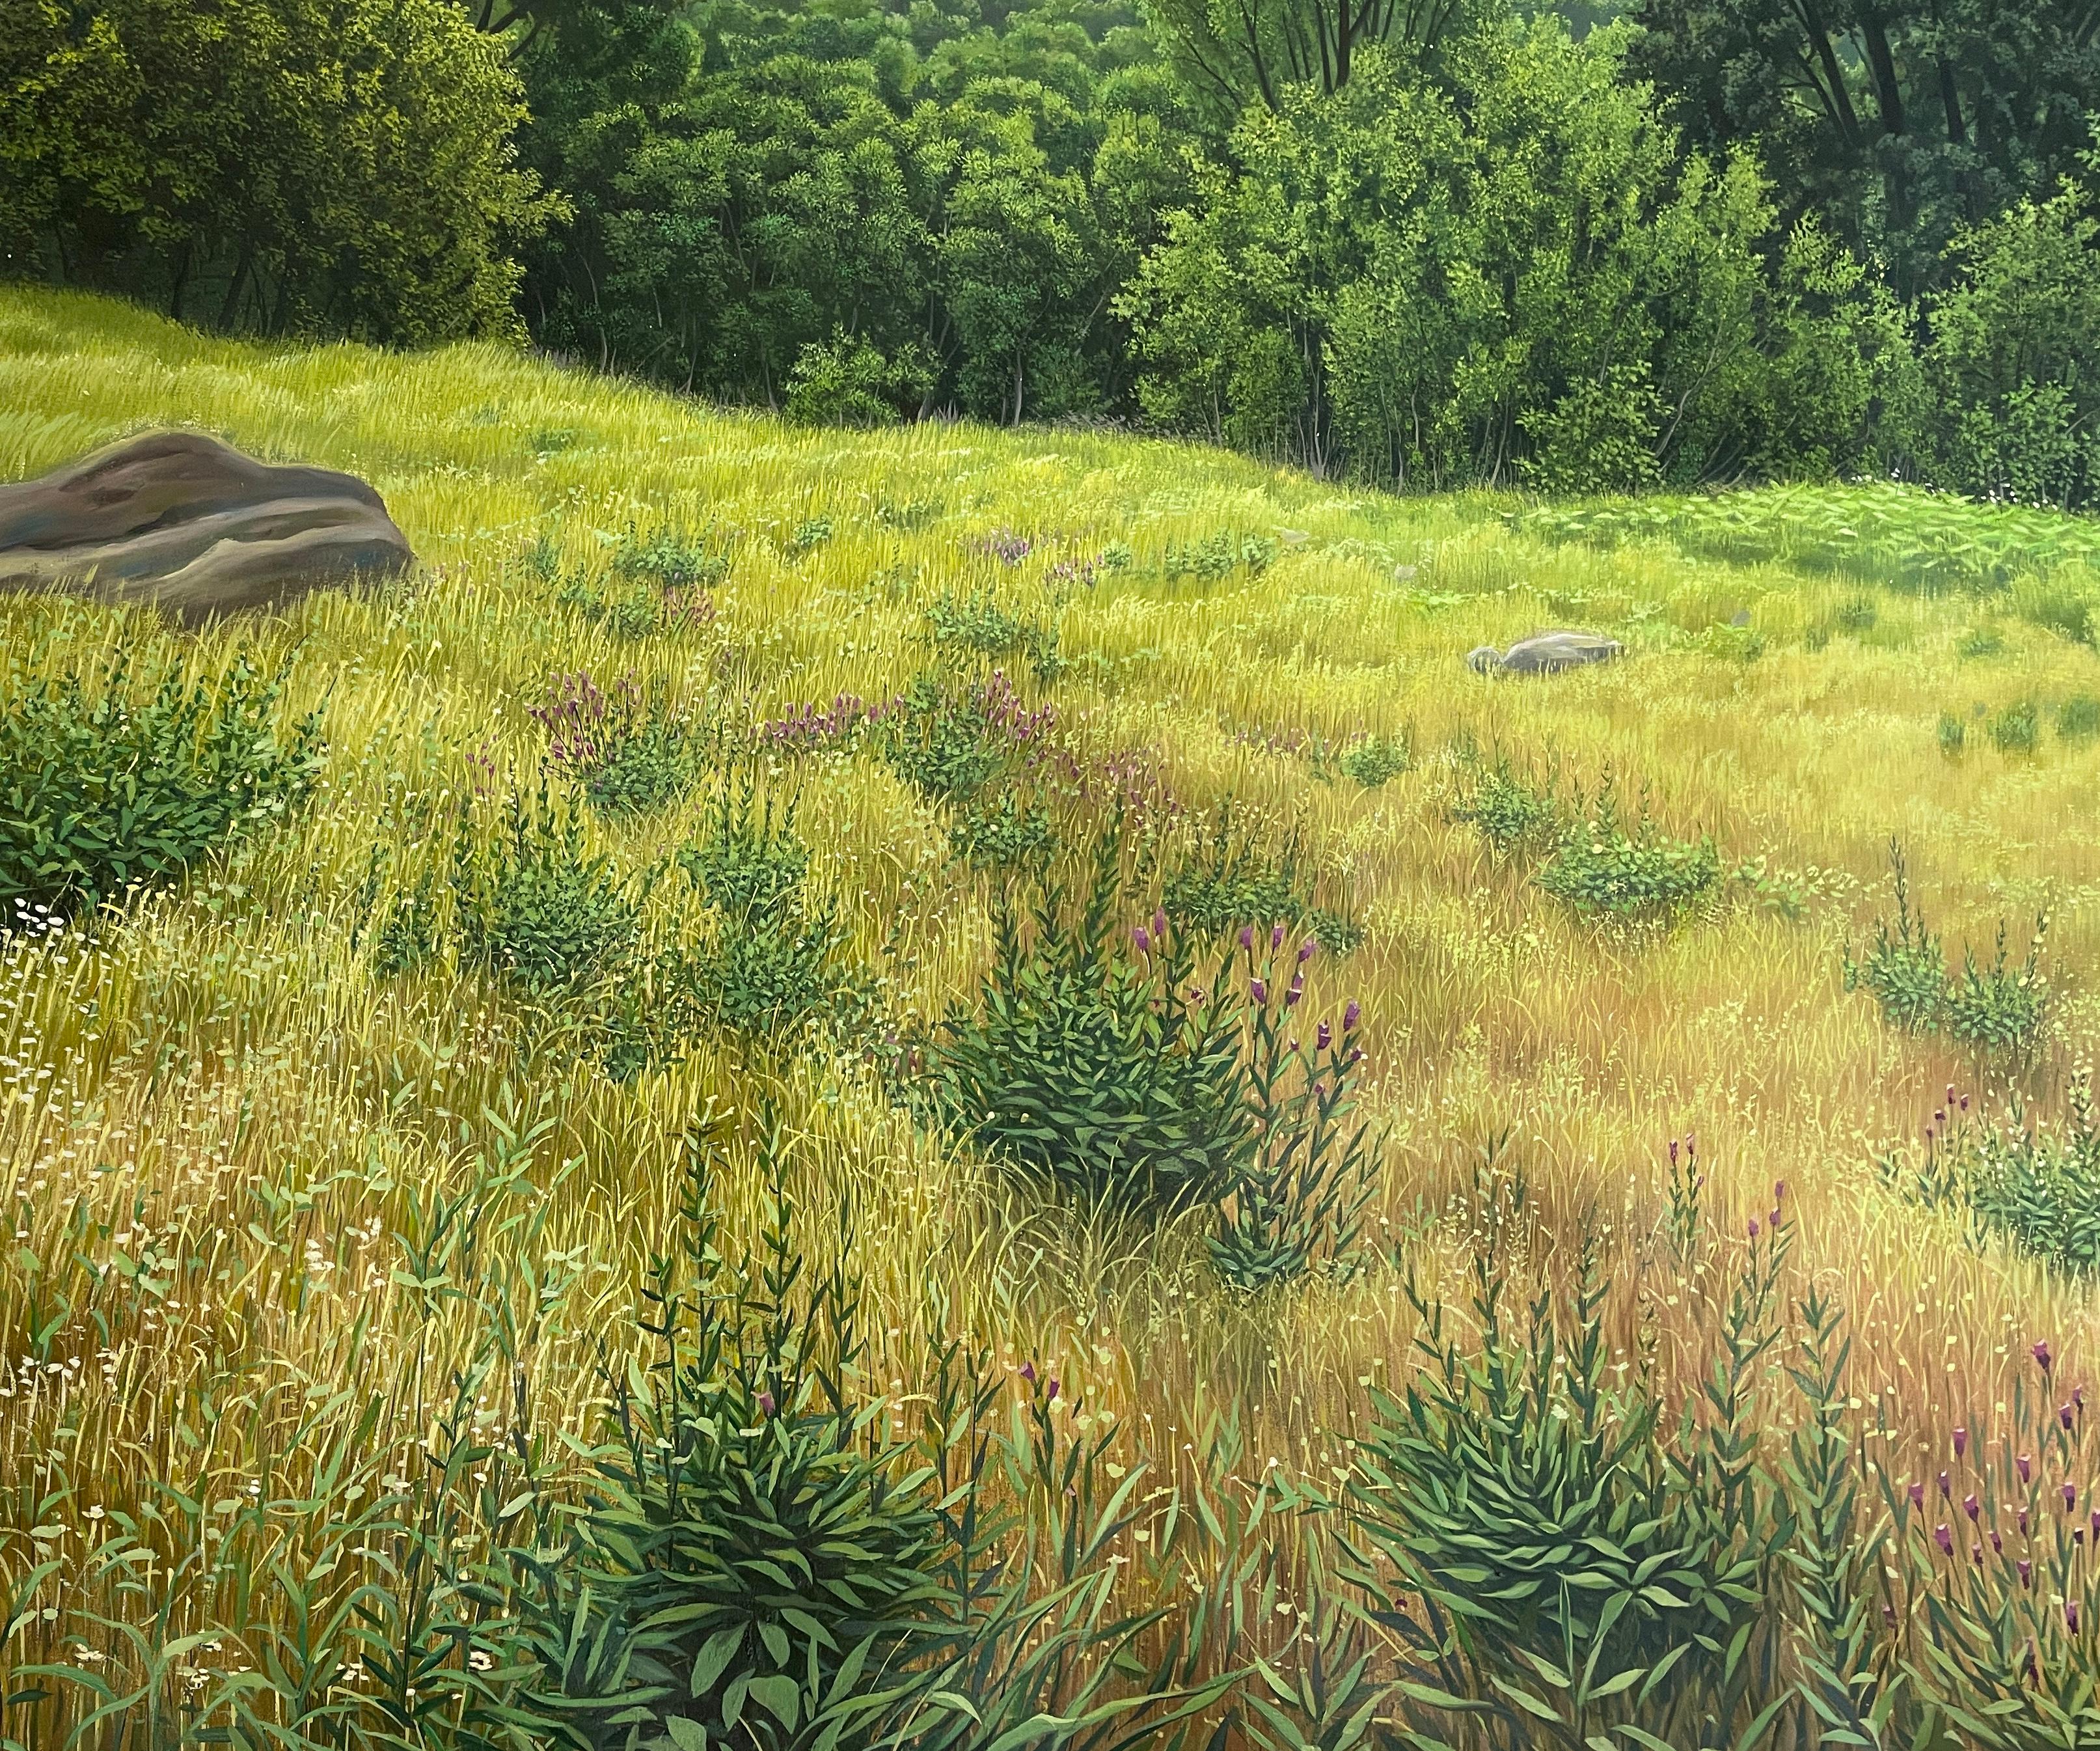 Unpredictable Valley - Highly Detailed Lush Landscape, Golden Field & Mountains - Painting by René Monzón Relova “Pozas”